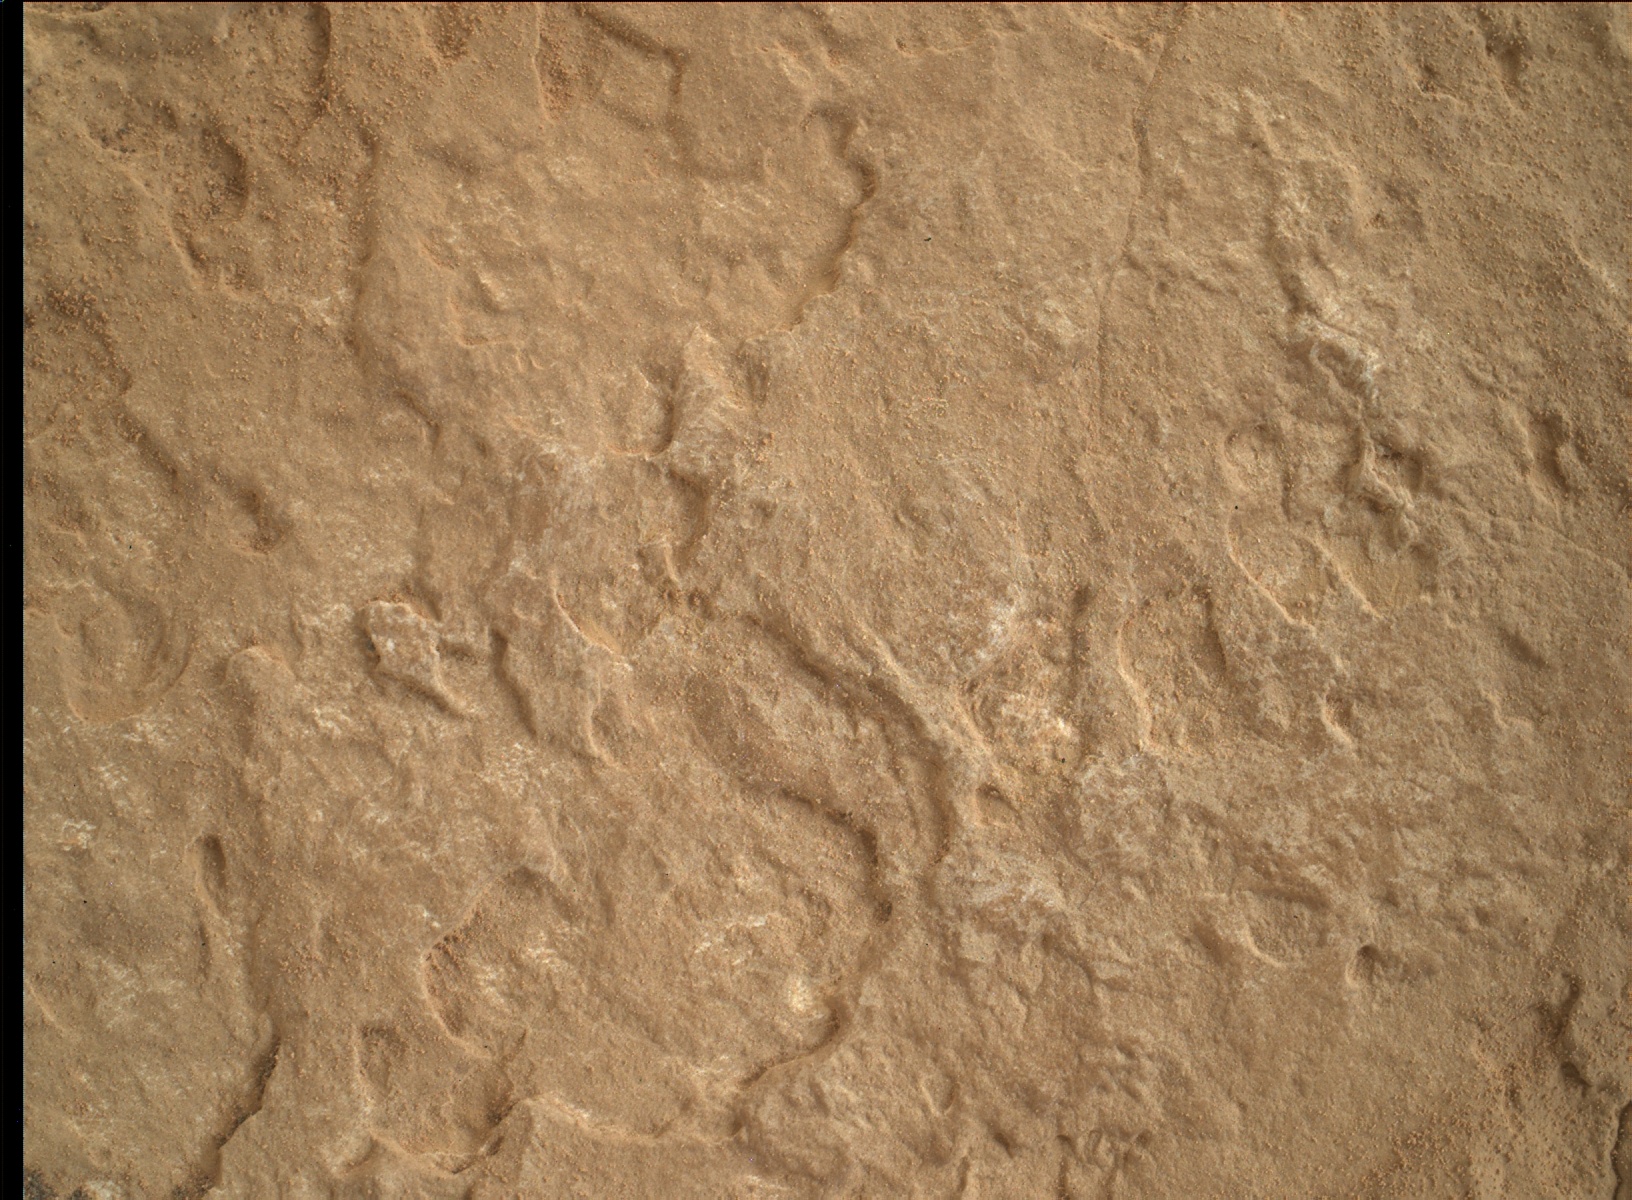 Nasa's Mars rover Curiosity acquired this image using its Mars Hand Lens Imager (MAHLI) on Sol 1702